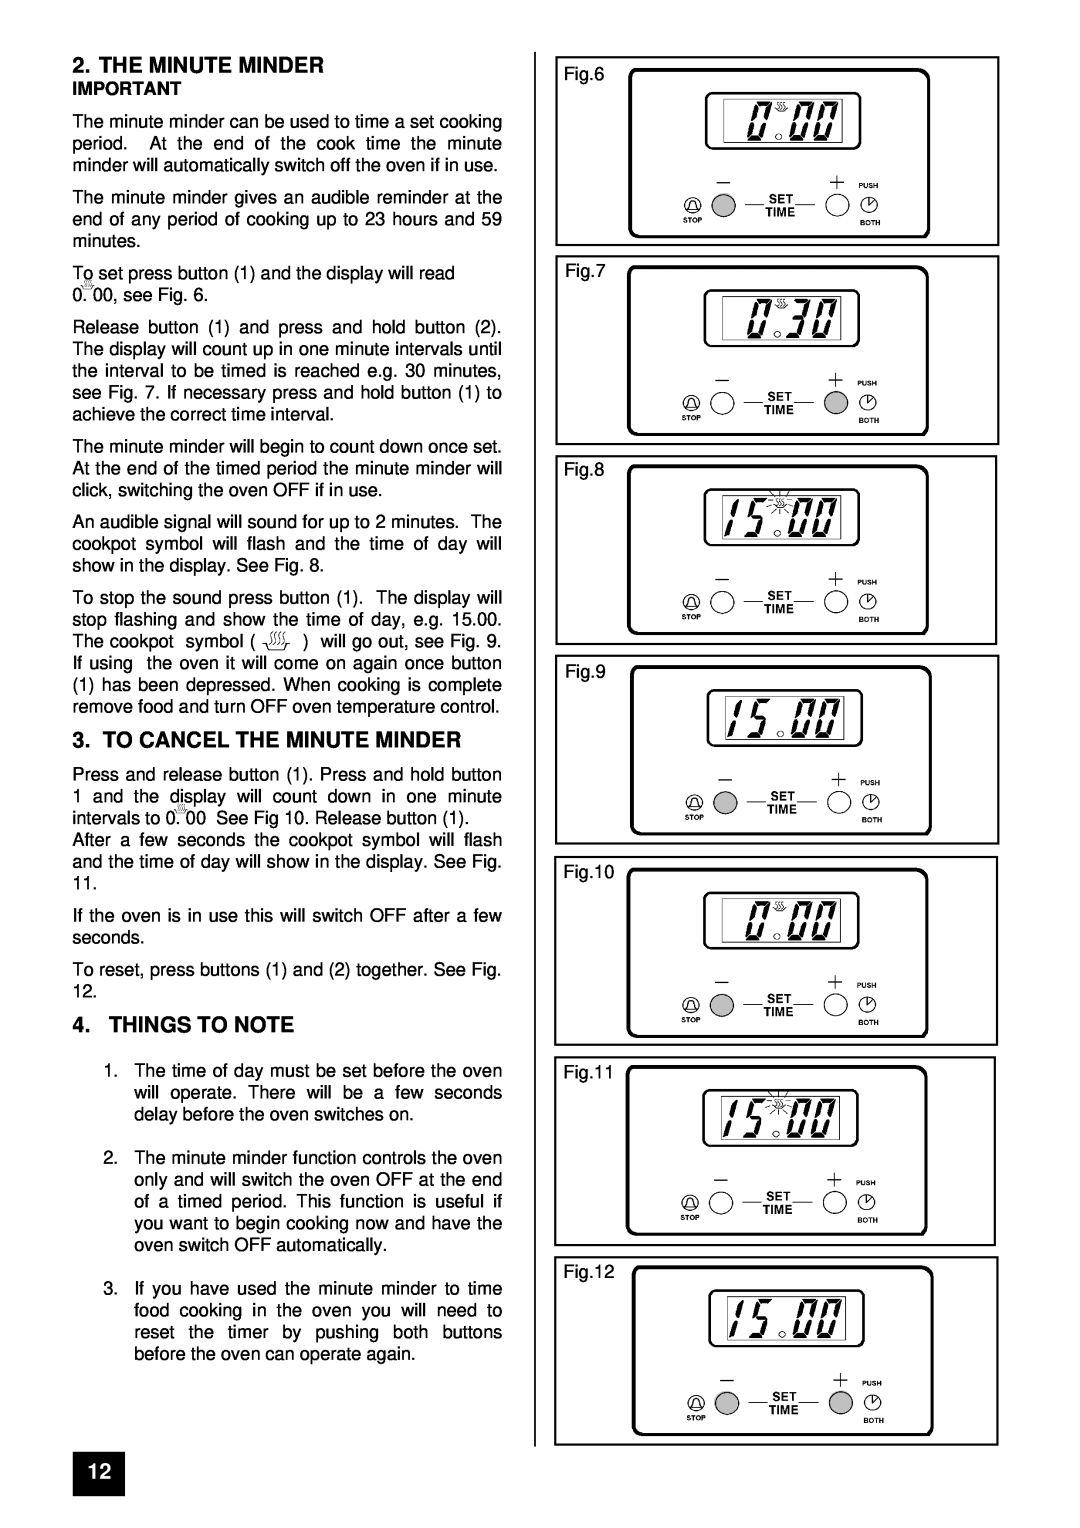 Zanussi ZCE 7300 manual To Cancel The Minute Minder, Things To Note 